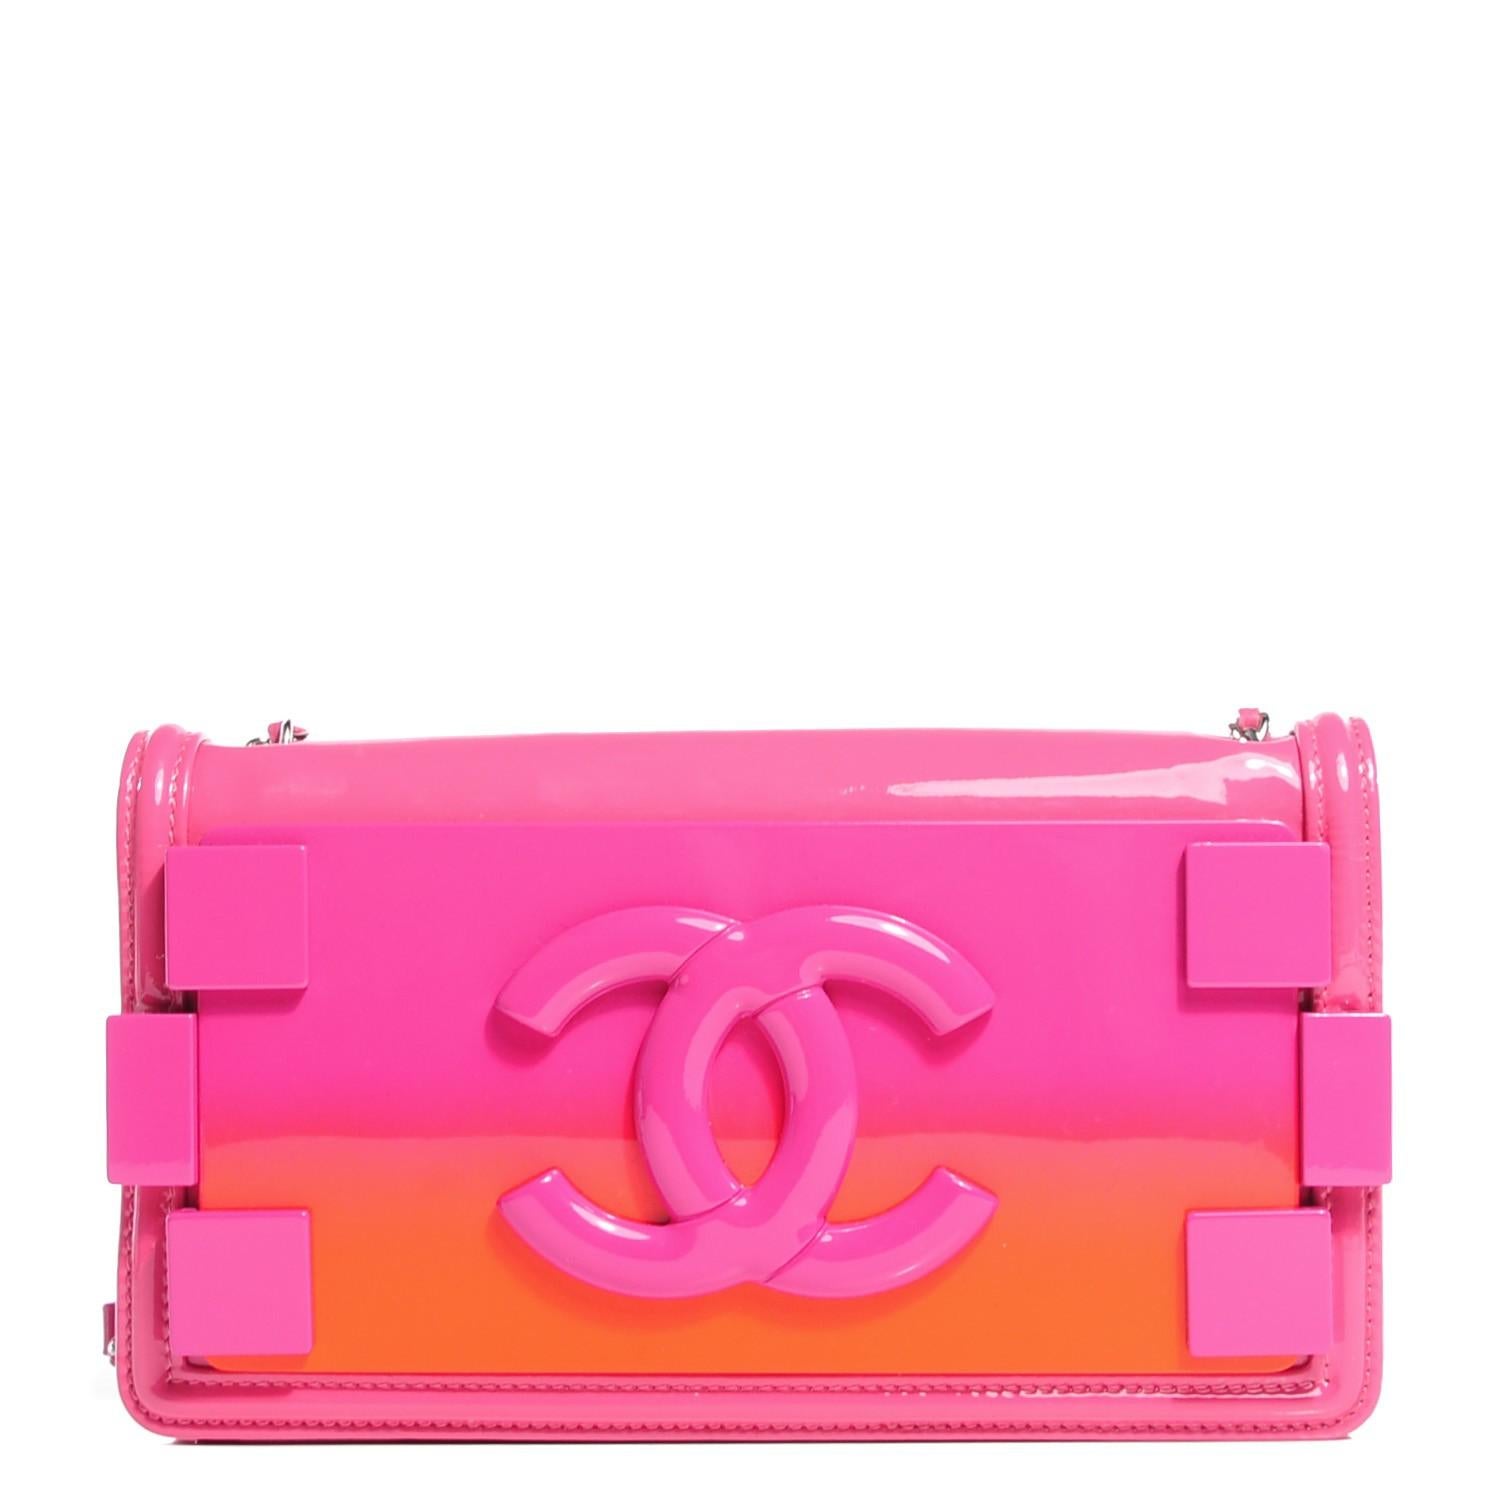 Chanel runway limited edition pink patent leather lego brick flap

Year: 2014
Silver hardware
One centered credit card slot
Pink nylon lining
Classic back pocket
Strap Drop 24” Crossbody
5” H x 9” W x 2.5” D

Made in Italy
